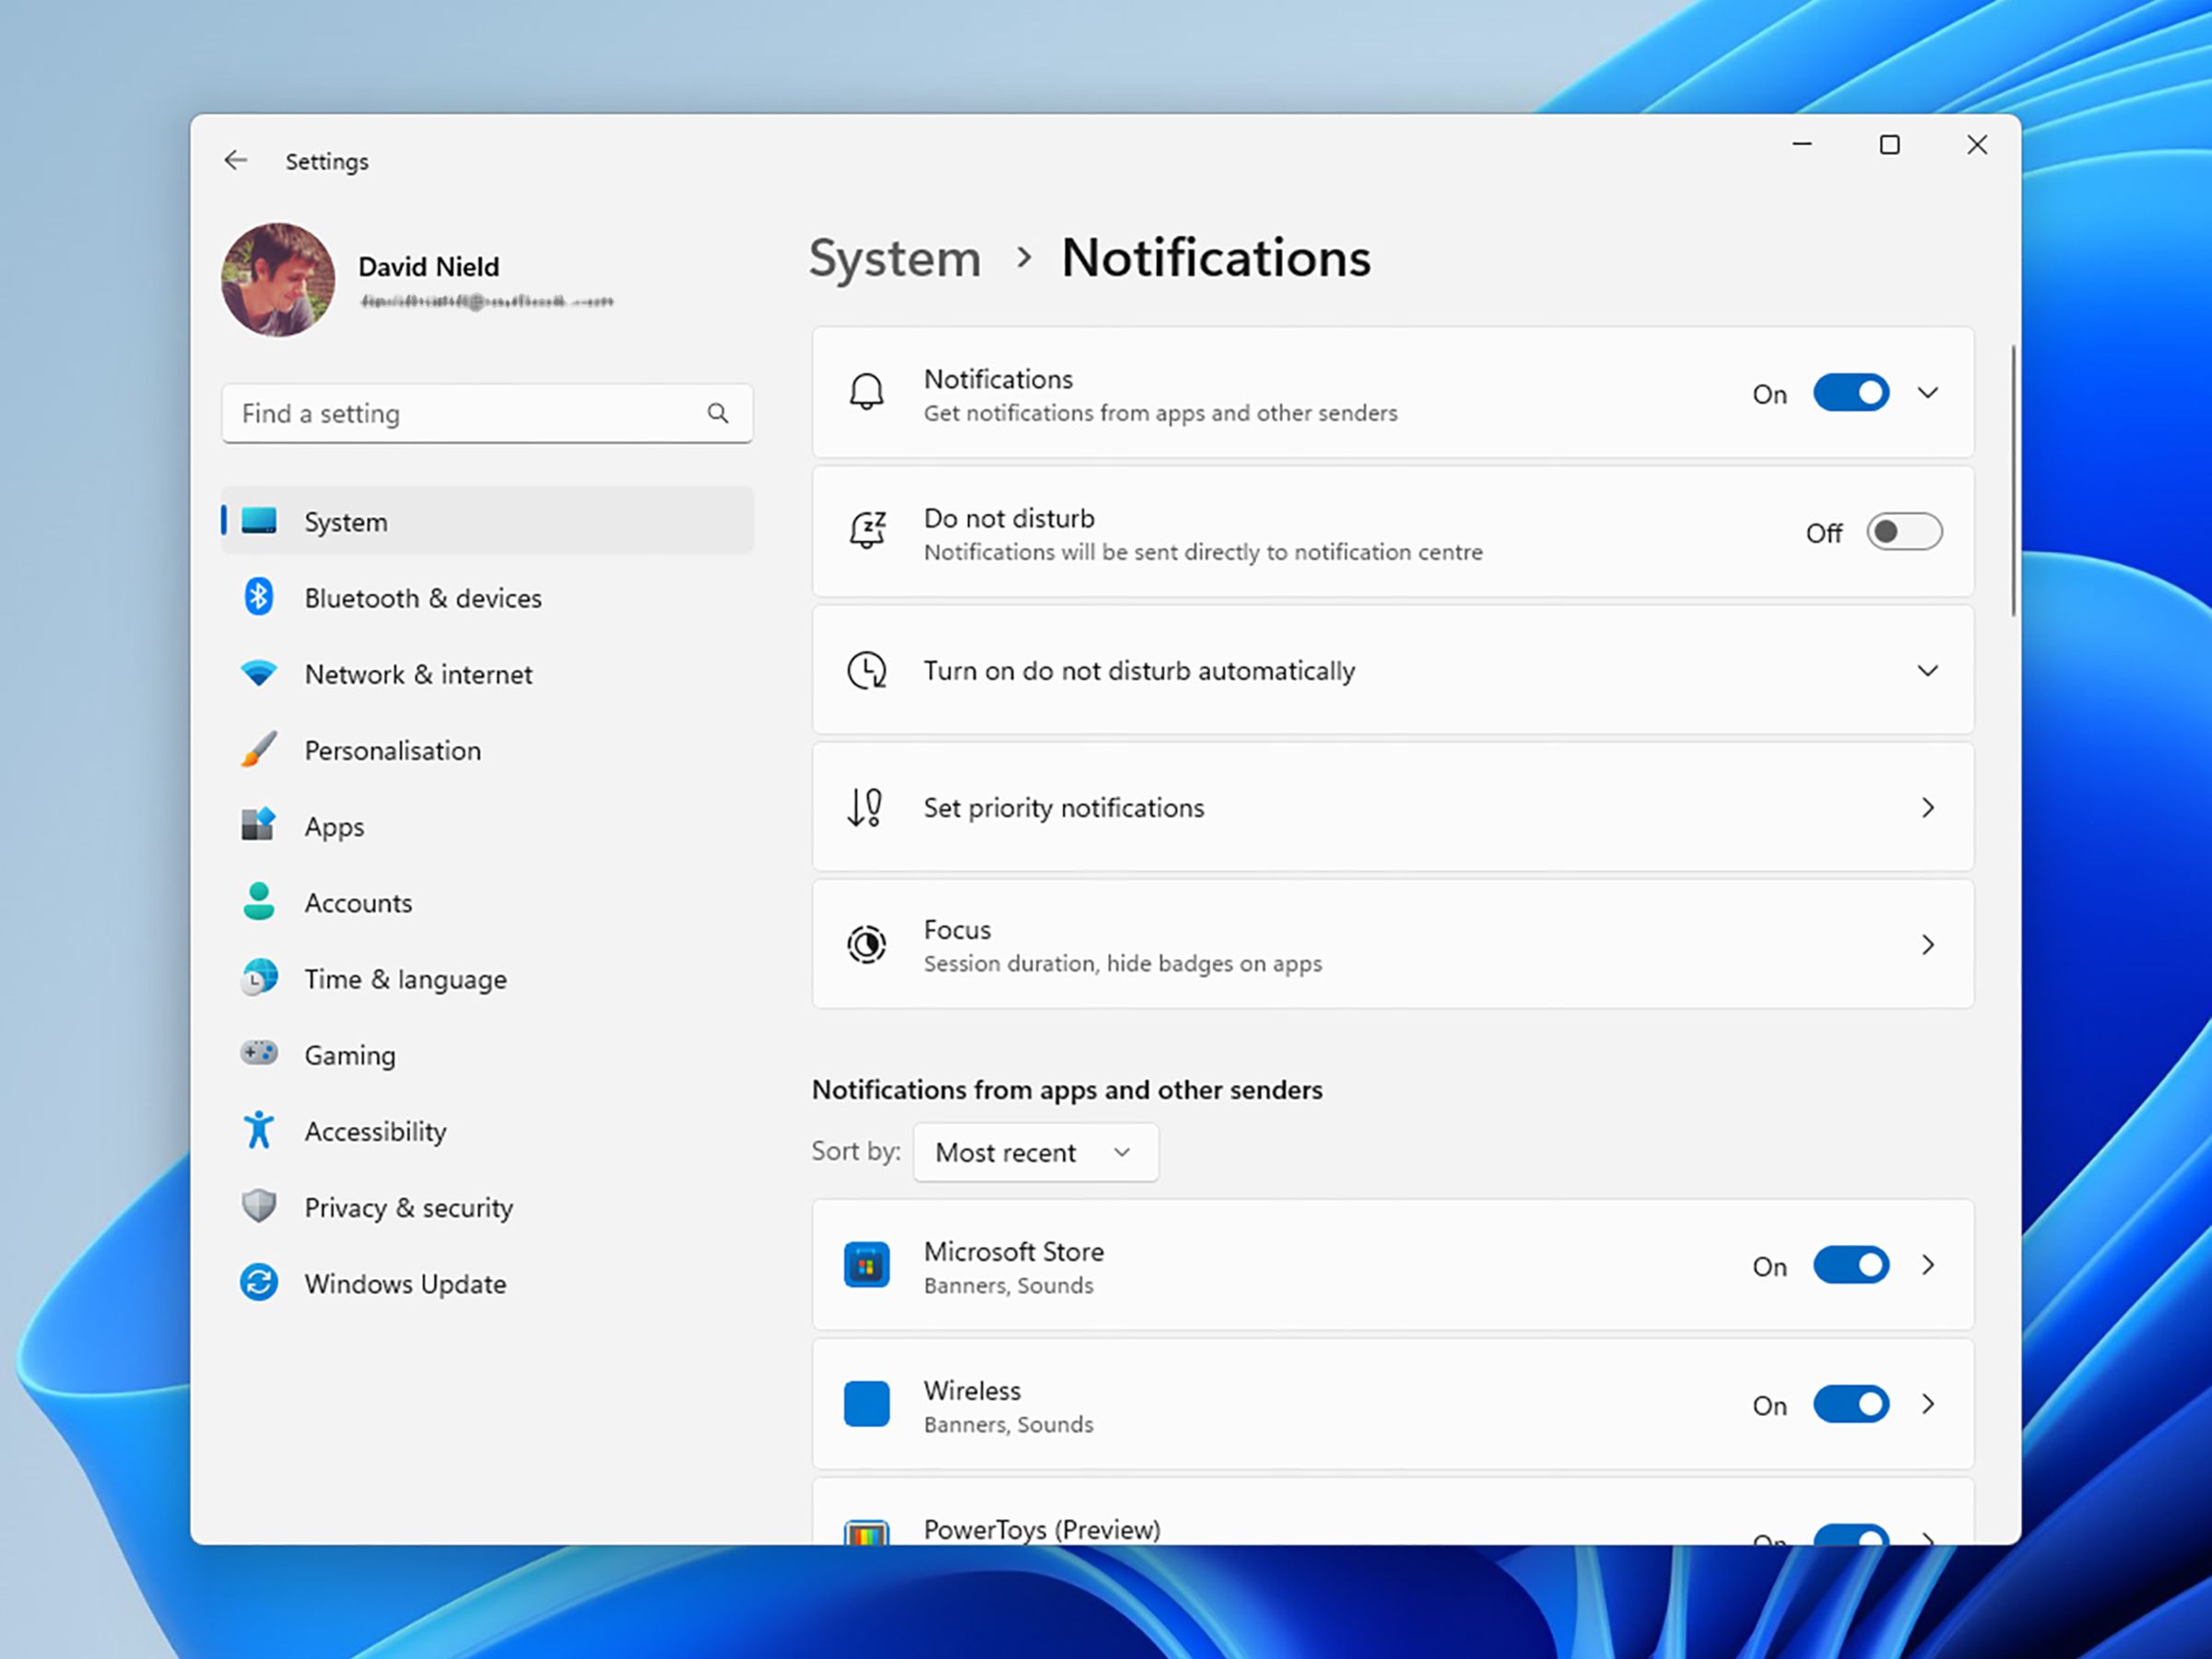 Systems &gt; Notifications page on Windows, with menu list in left column and various features running down the center.